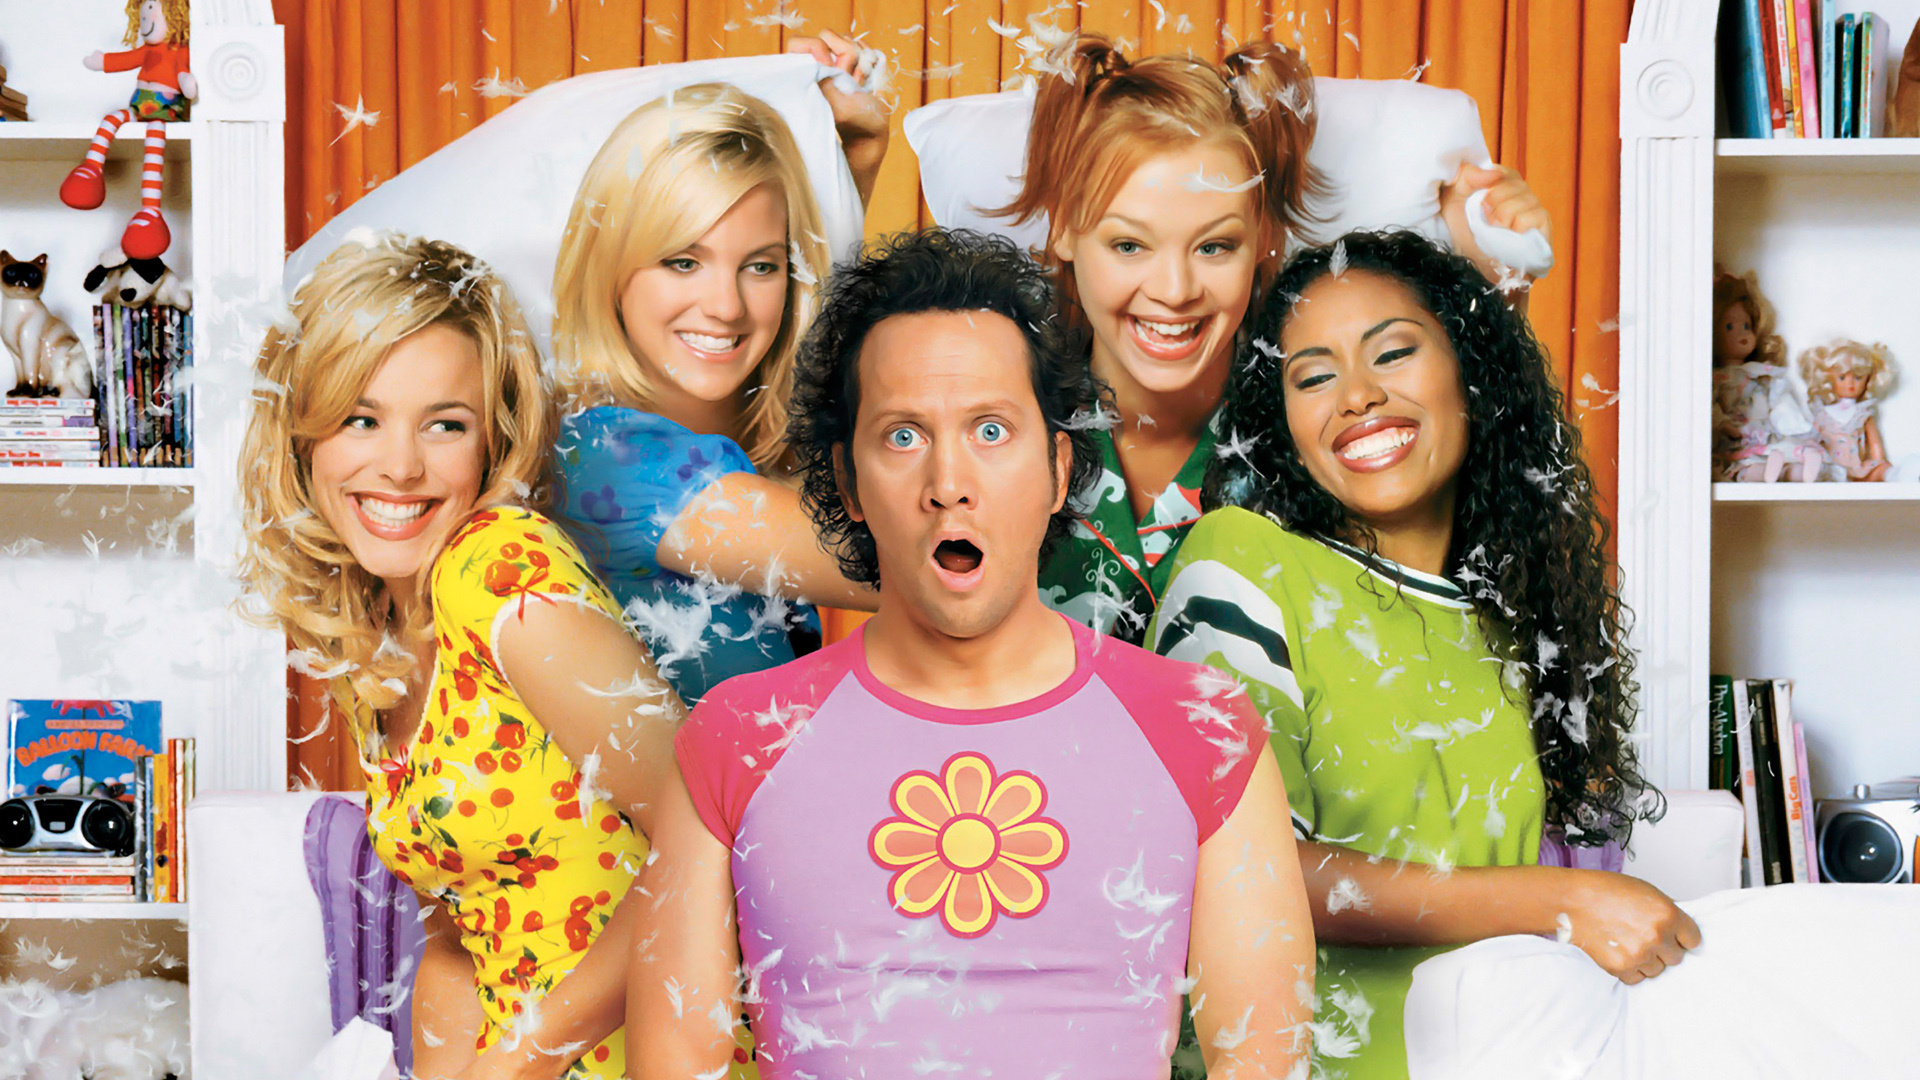 Rob Schneider: The Hot Chick, Clive Maxtone, Man Jessica Spencer, A 2002 American comedy. 1920x1080 Full HD Background.